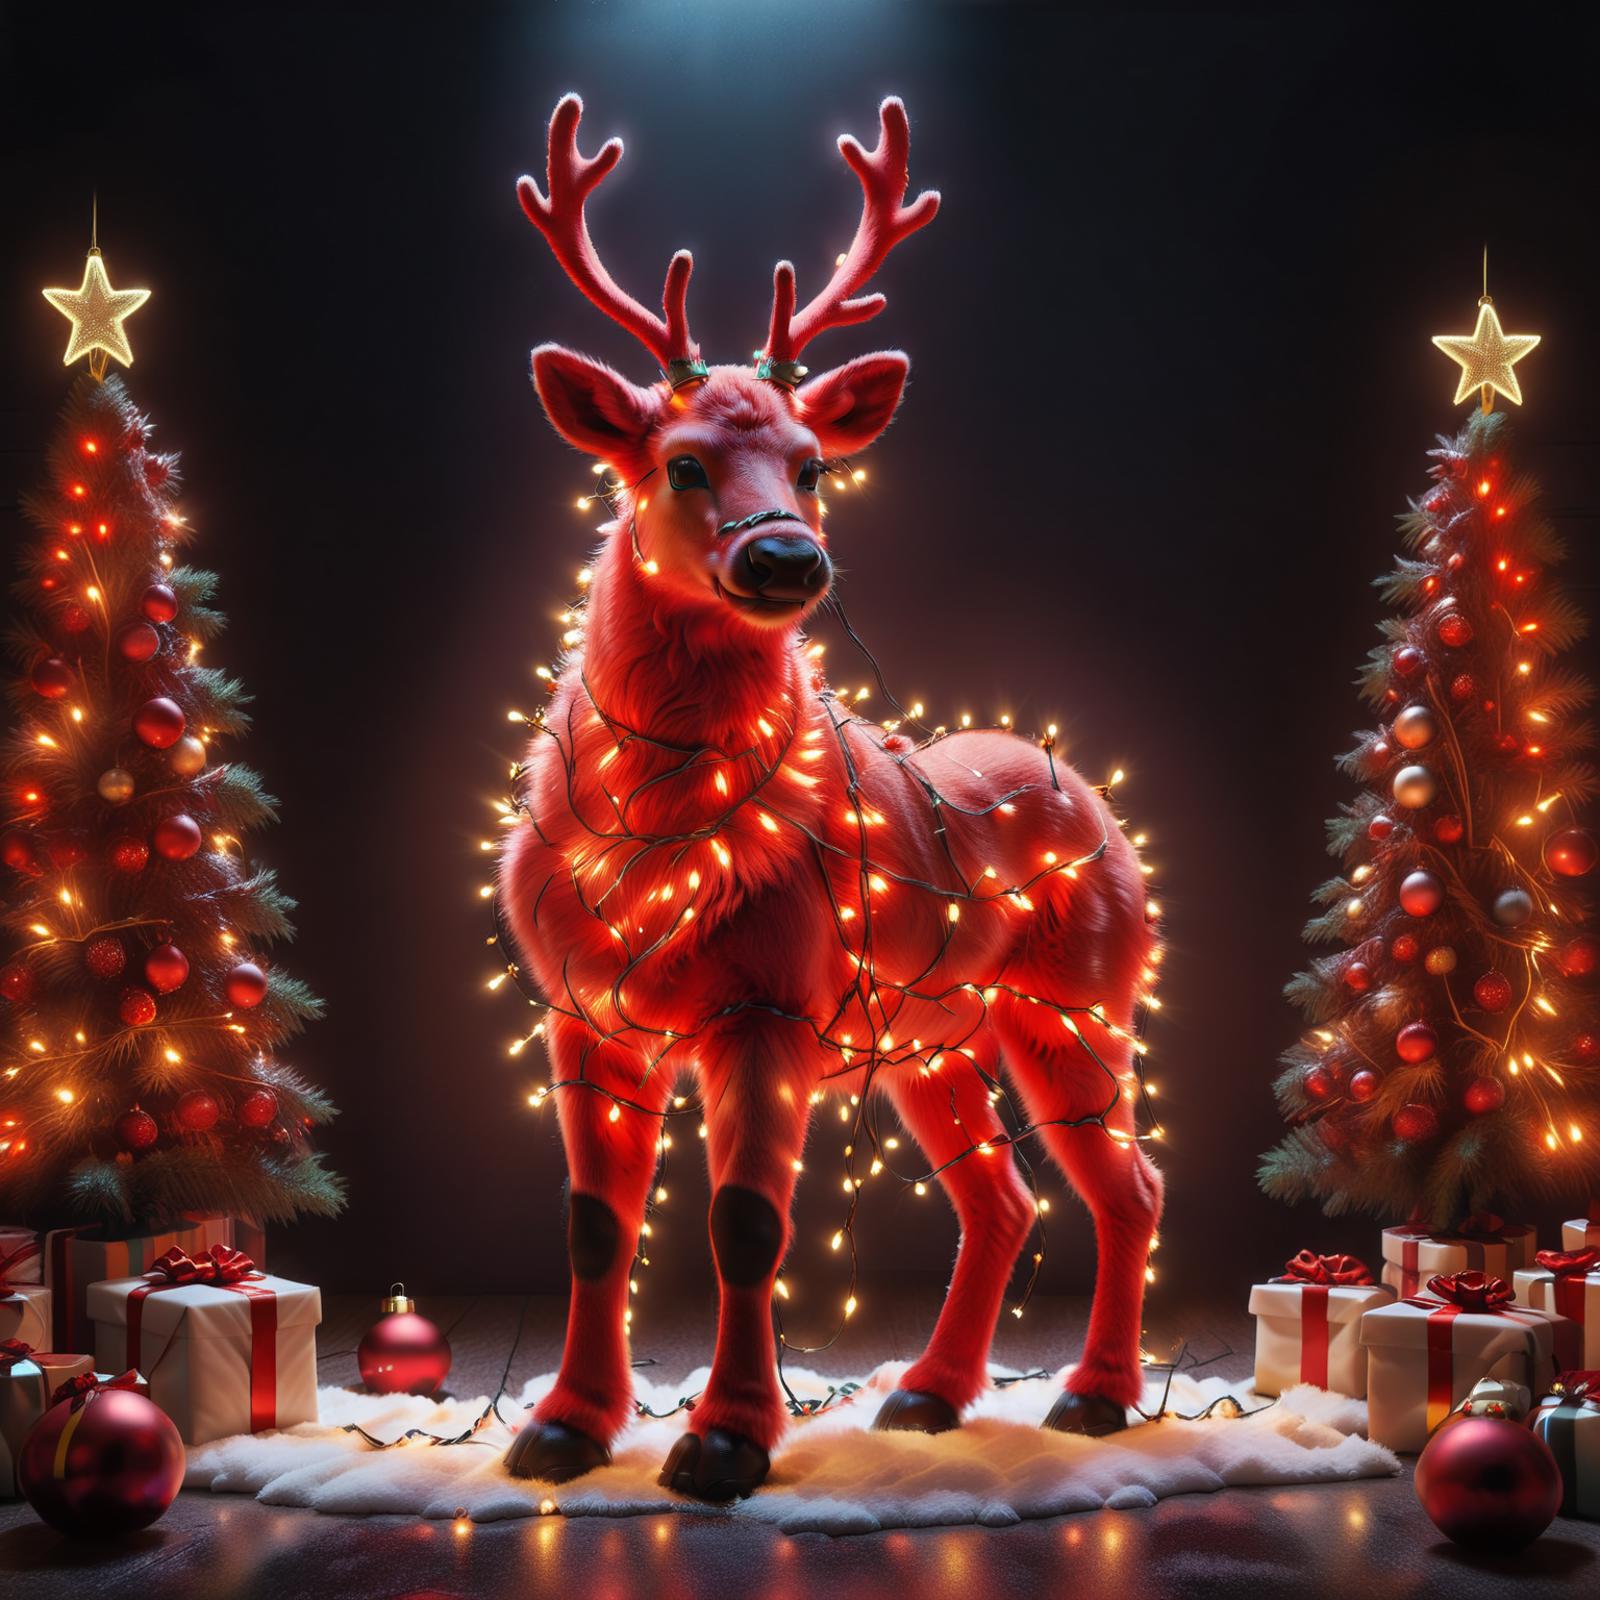 A Christmas display featuring a reindeer wearing a necklace of lights and surrounded by a fake Christmas tree, presents, and decorations.